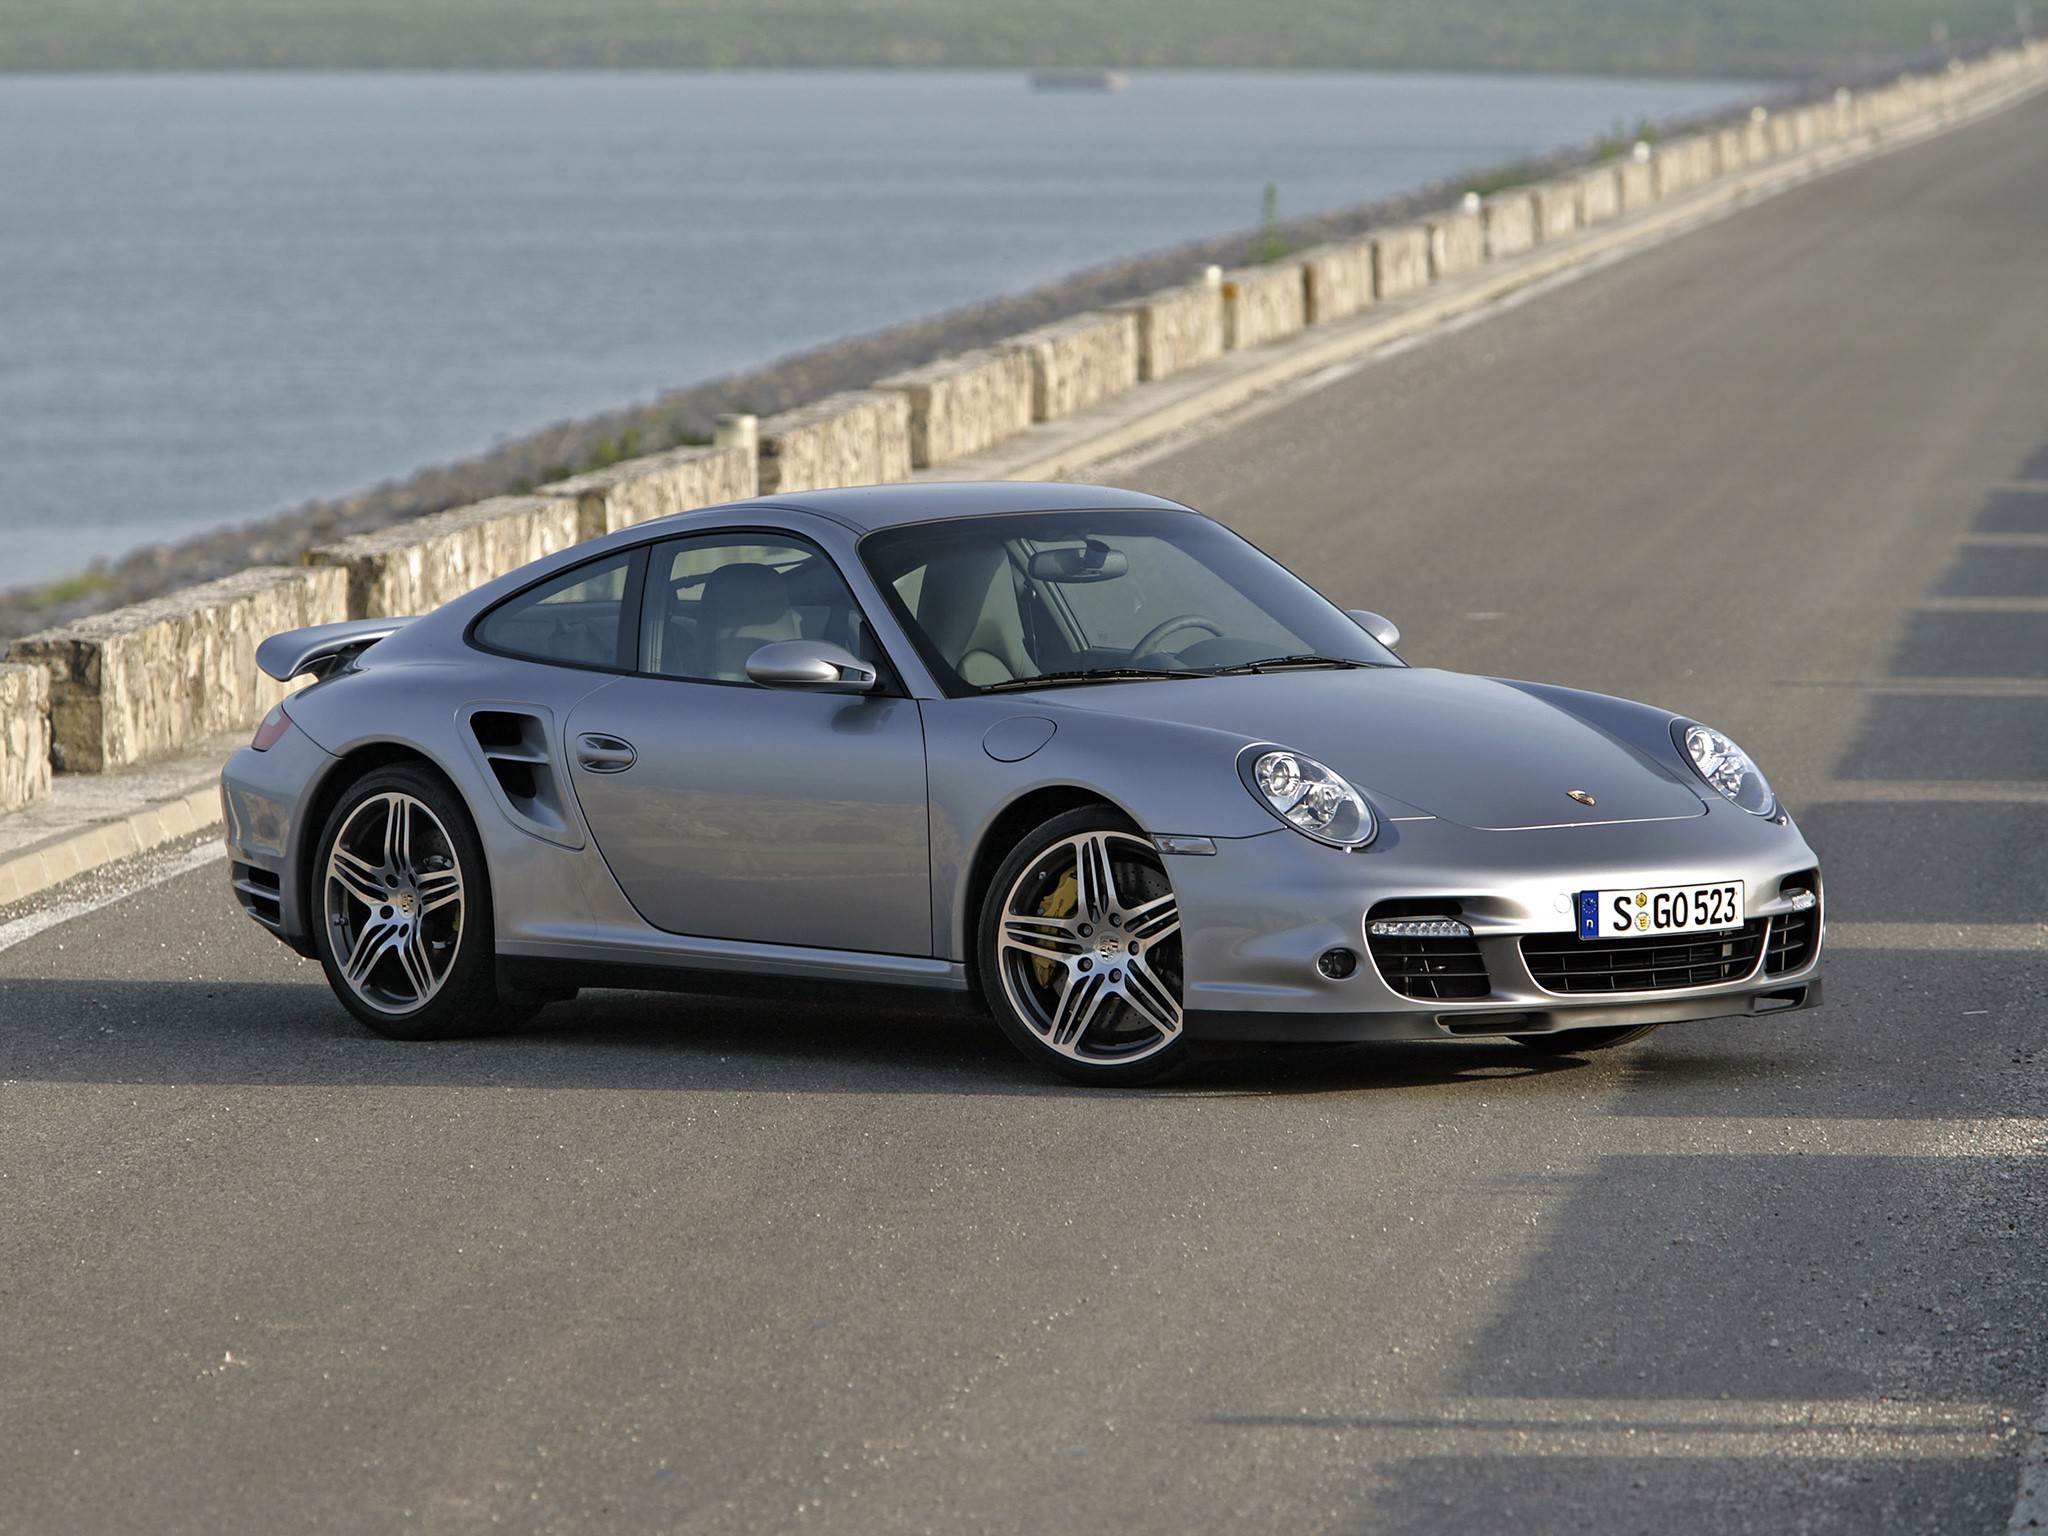 Porsche 911 Turbo Coupe (997) (2007) – Specifications & Performance